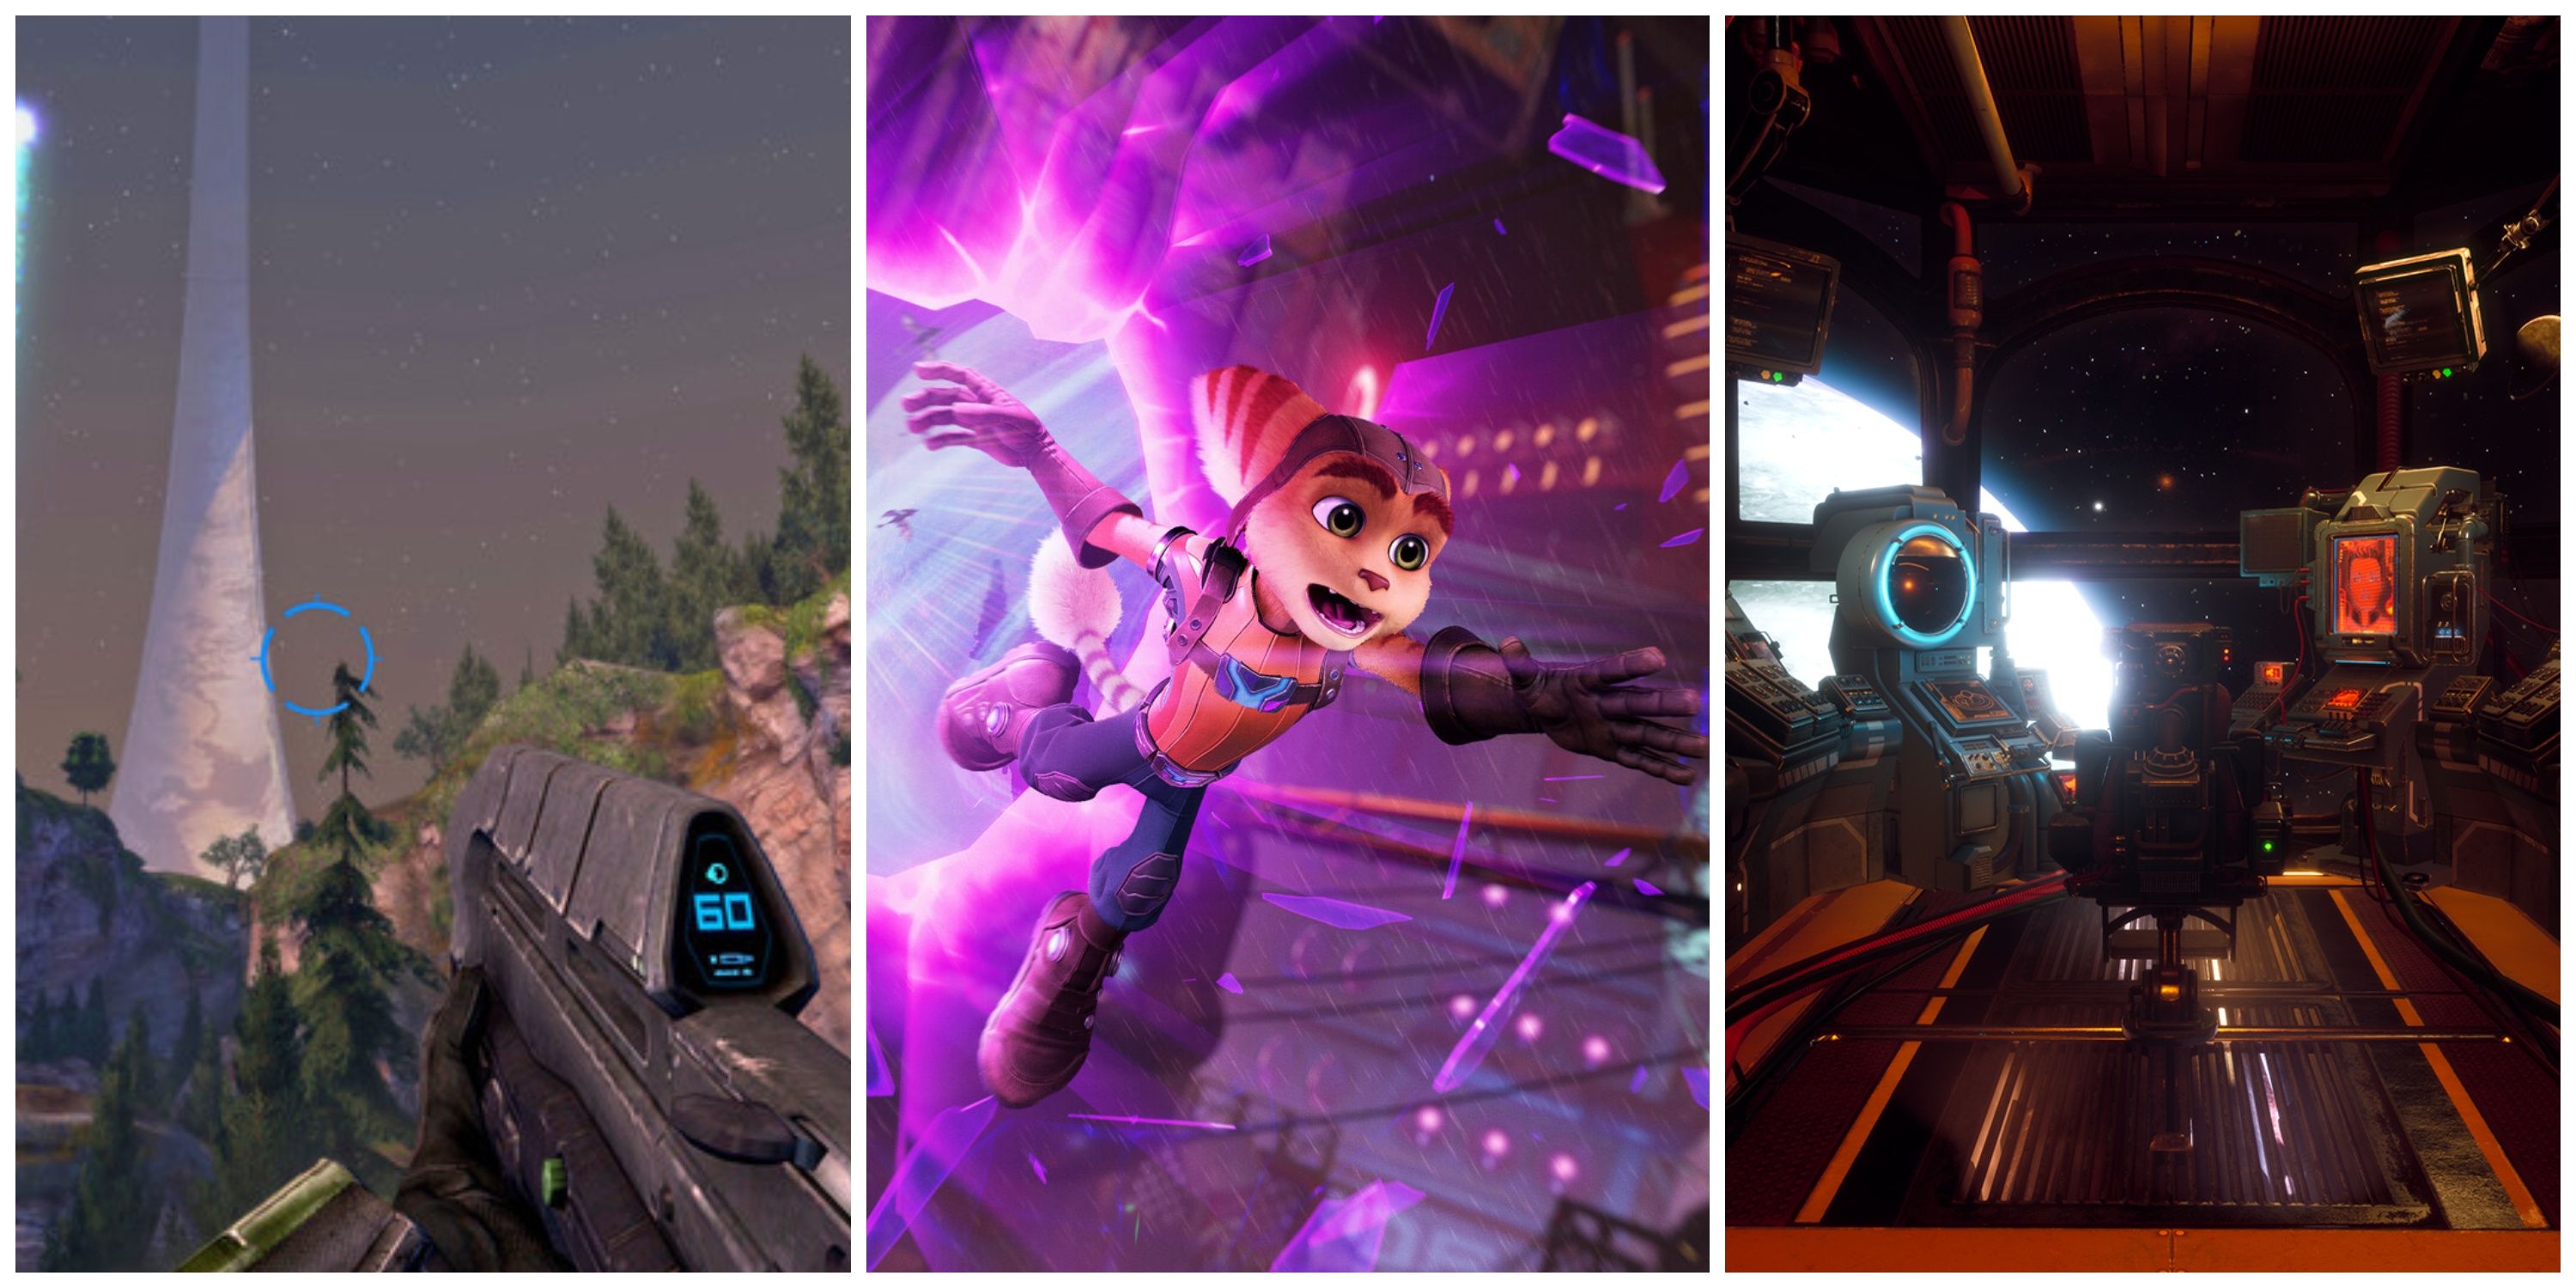 Best Soft Sci-Fi Games (Featured Image) - Halo + Ratchet & Clank: Rift Apart + The Outer Worlds